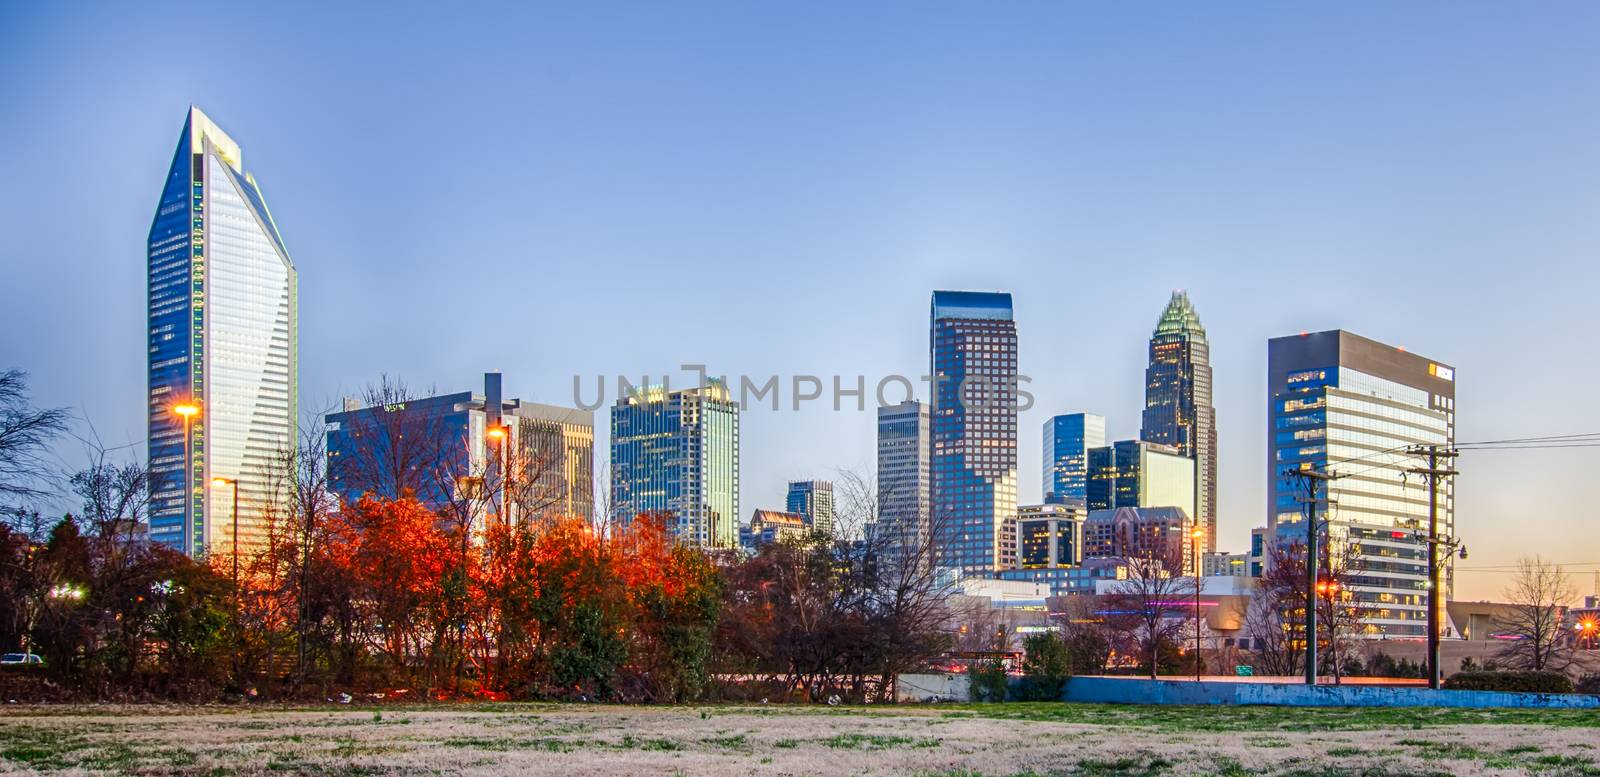 early morning in charlotte nc by digidreamgrafix